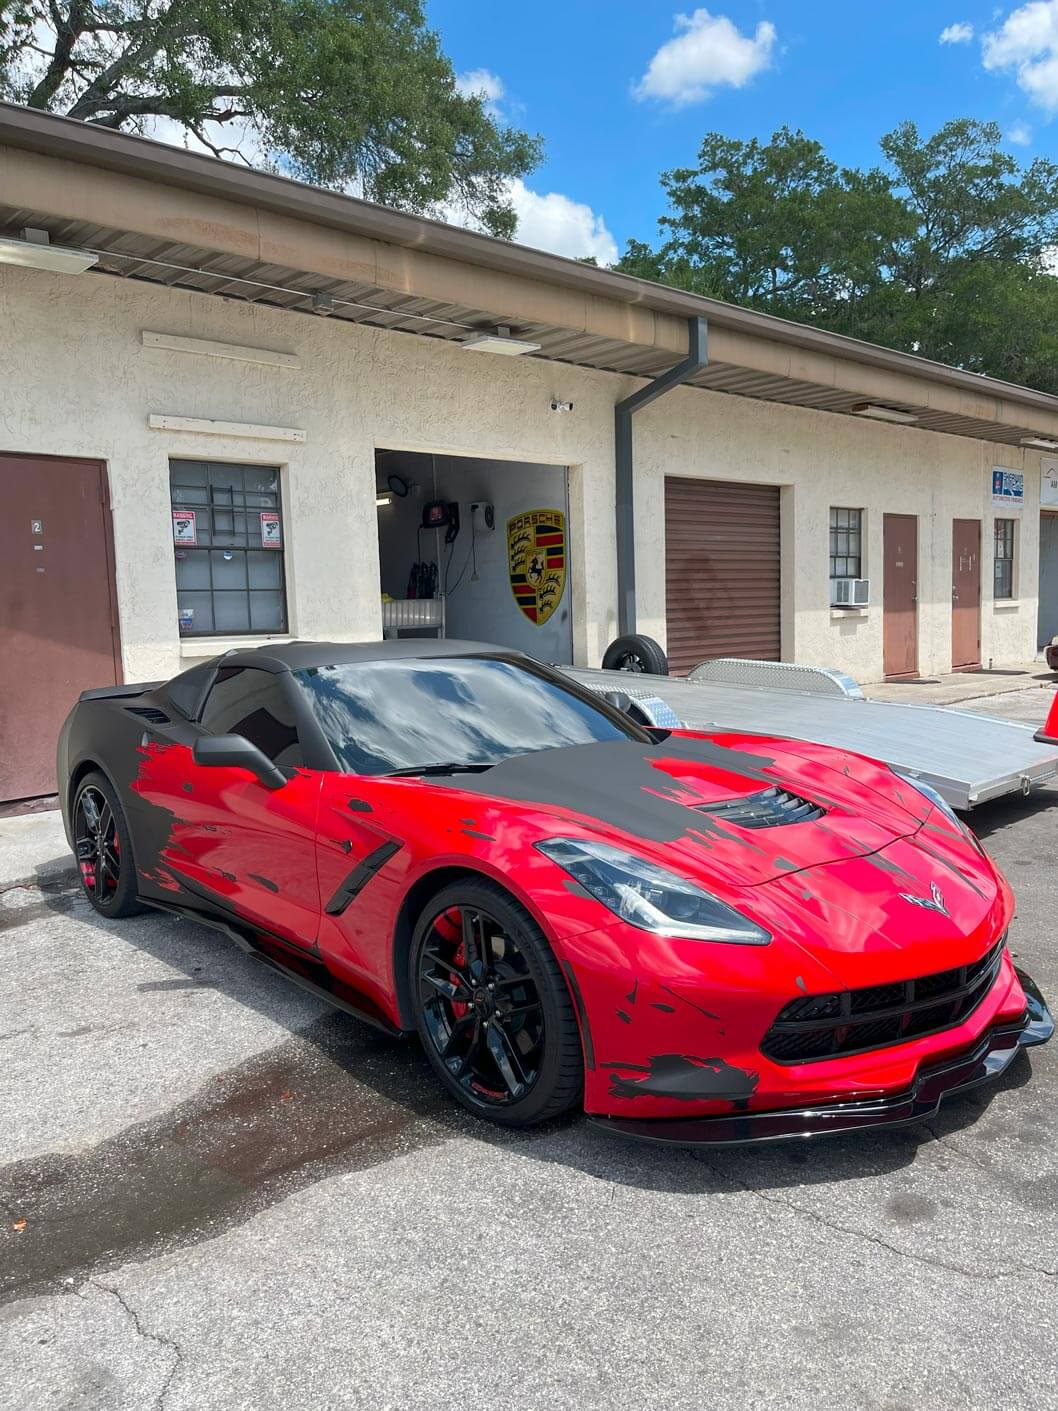 Fully Vinyl Wrap on Corvette in Tampa FL, Red and Blue